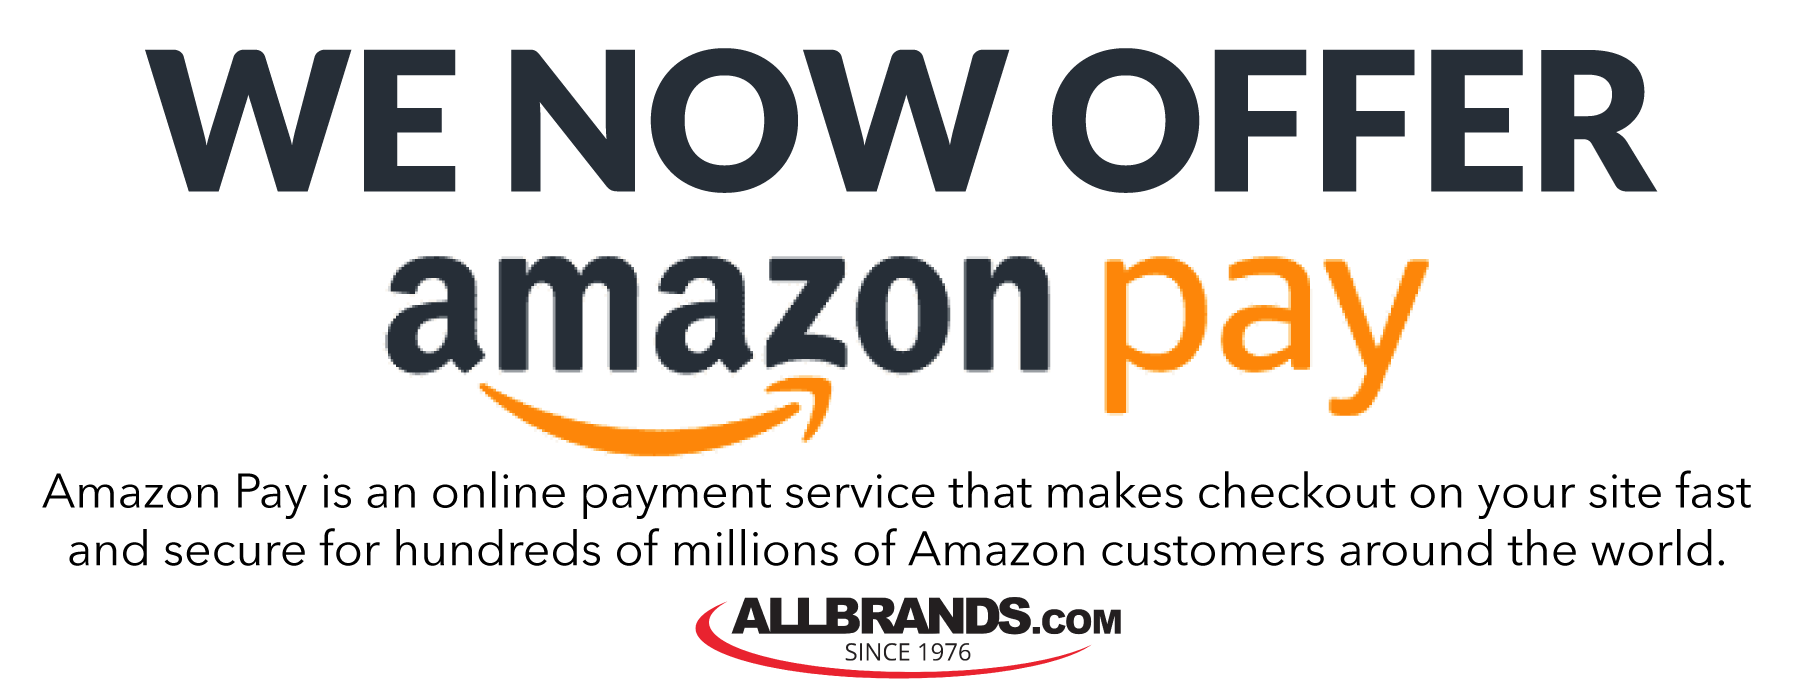 we now offer amazon pay. amazon is an online payment service that makes checkout on your site fast and secure for hundreds of millions of Amazon customers around the world